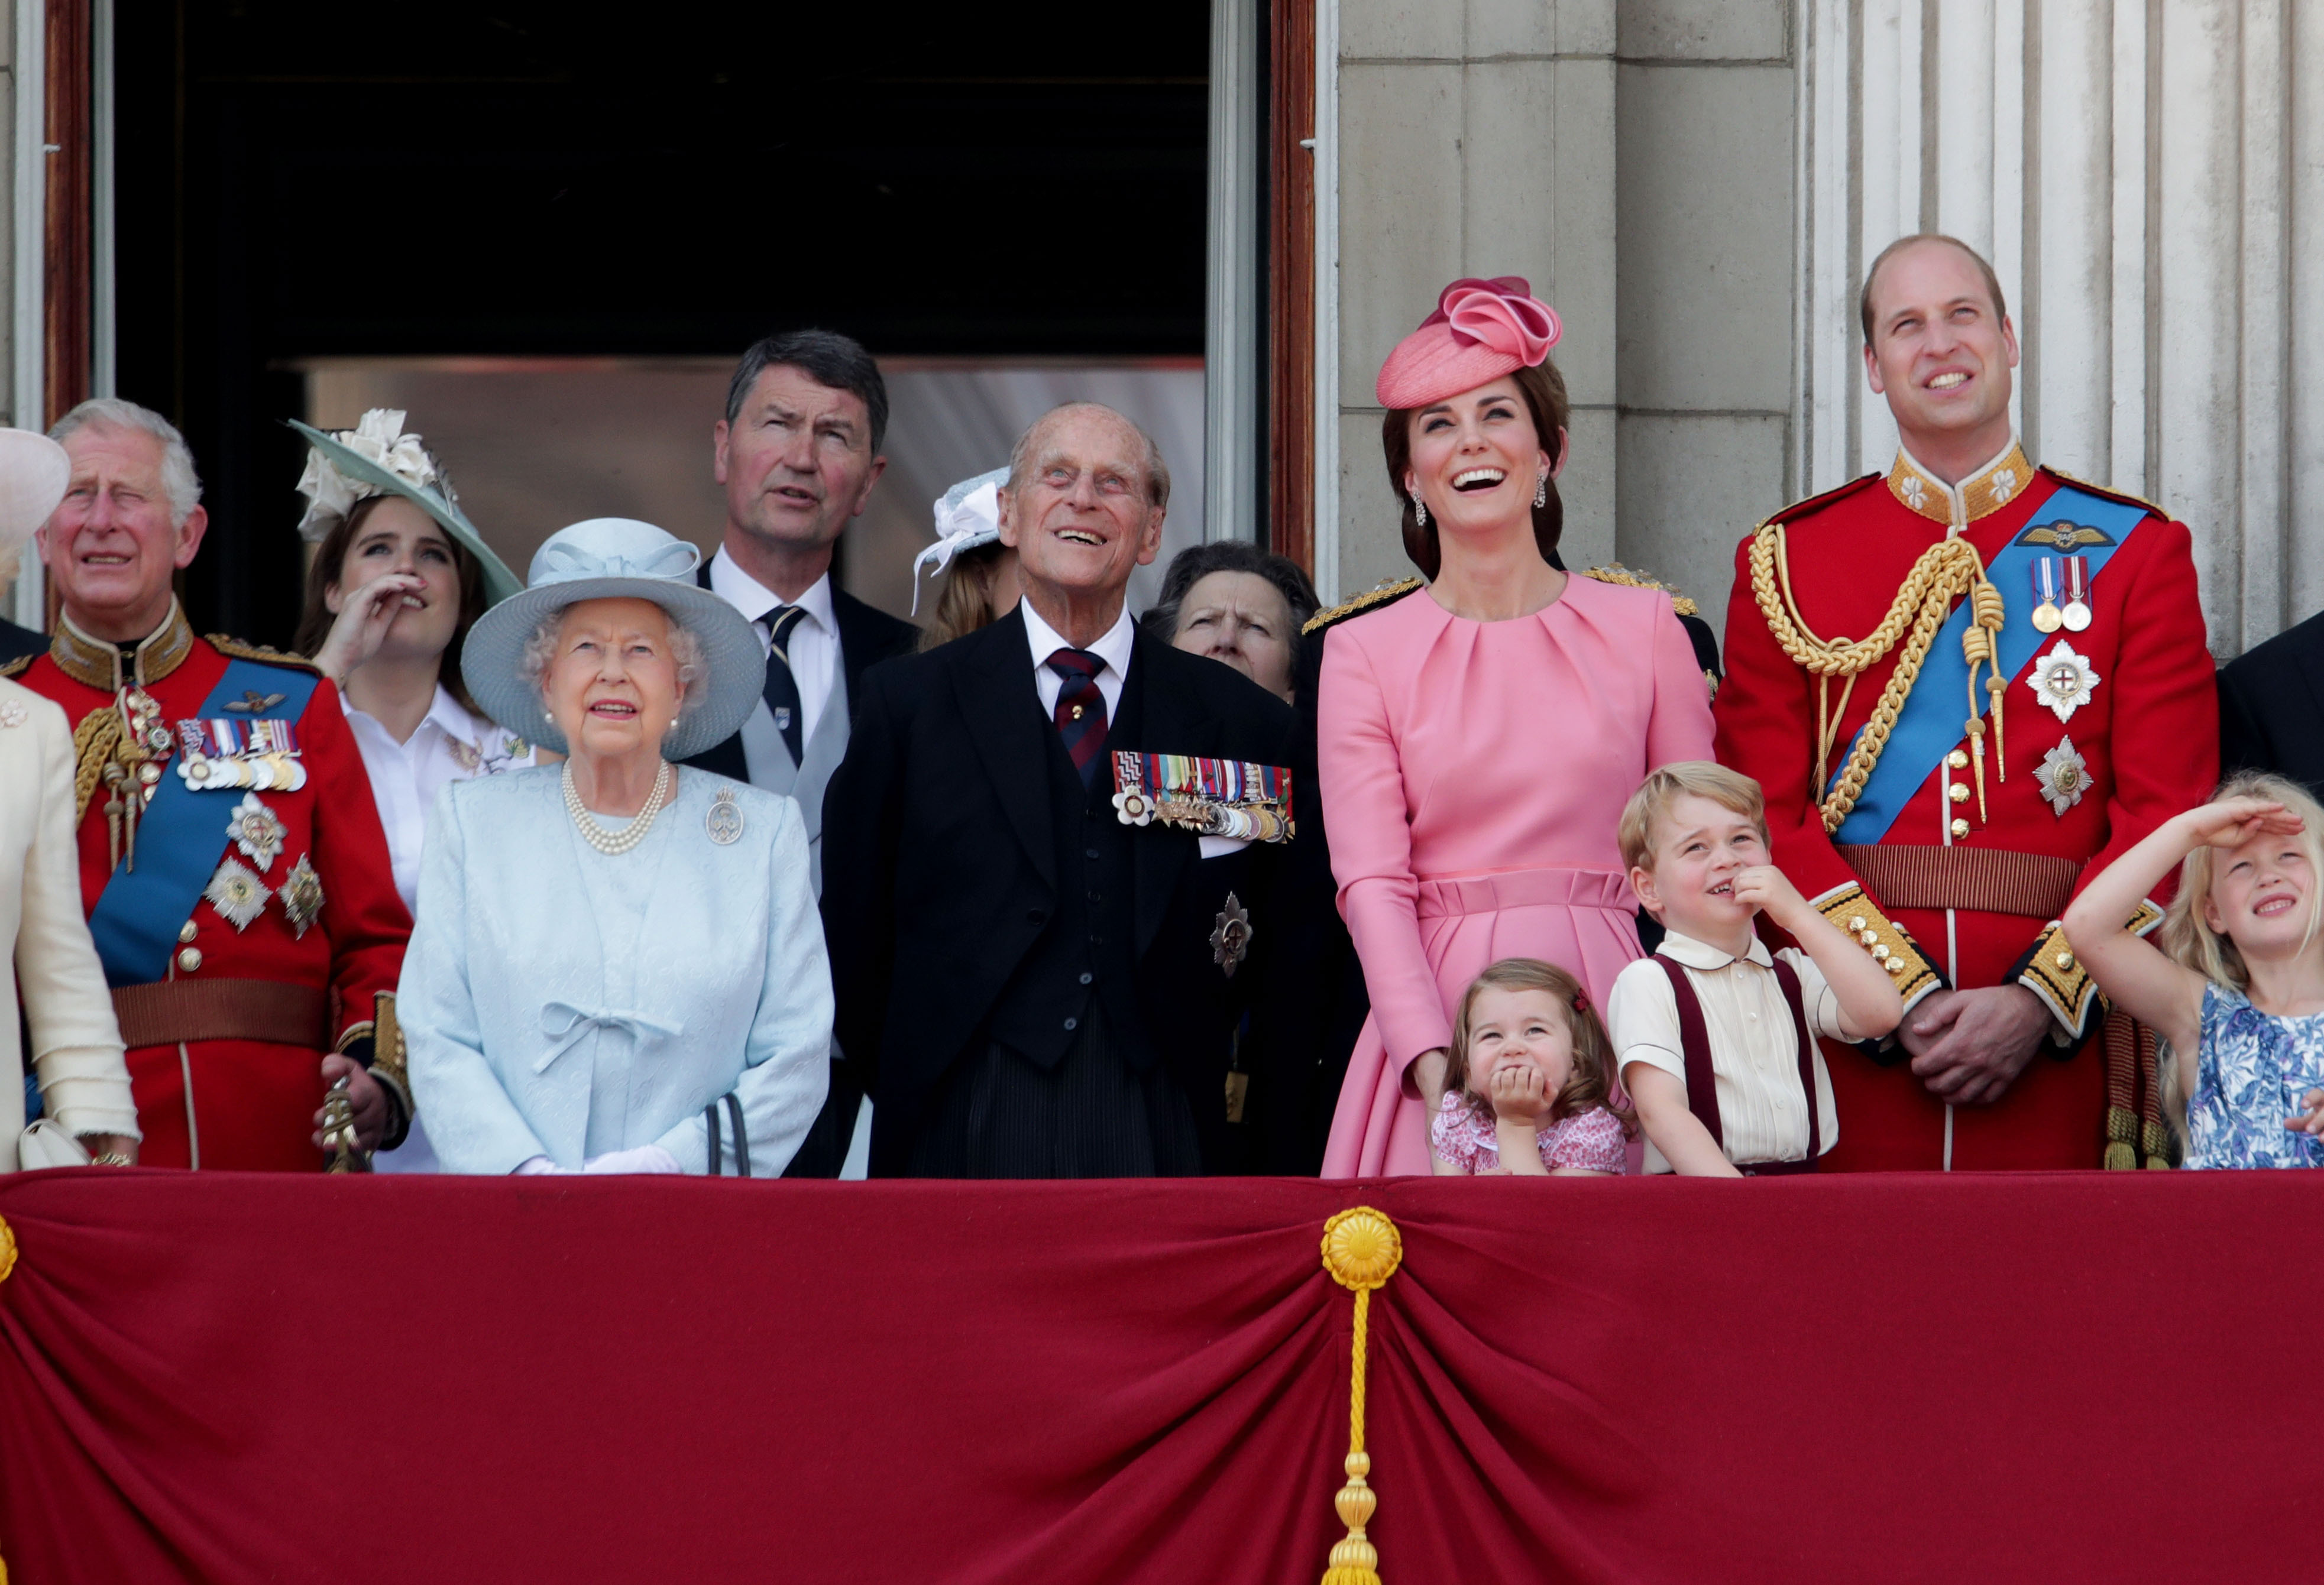 The Prince of Wales, Princess Eugenie, Queen Elizabeth II, The Duke of Edinburgh, Duchess of Cambridge, Princess Charlotte, Prince George and The Duke of Cambridge on the balcony of Buckingham Palace, in central London, following the Trooping the Colour ceremony at Horse Guards Parade as the Queen celebrates her official birthday today. (Yui Mok - PA Images—PA Images via Getty Images)